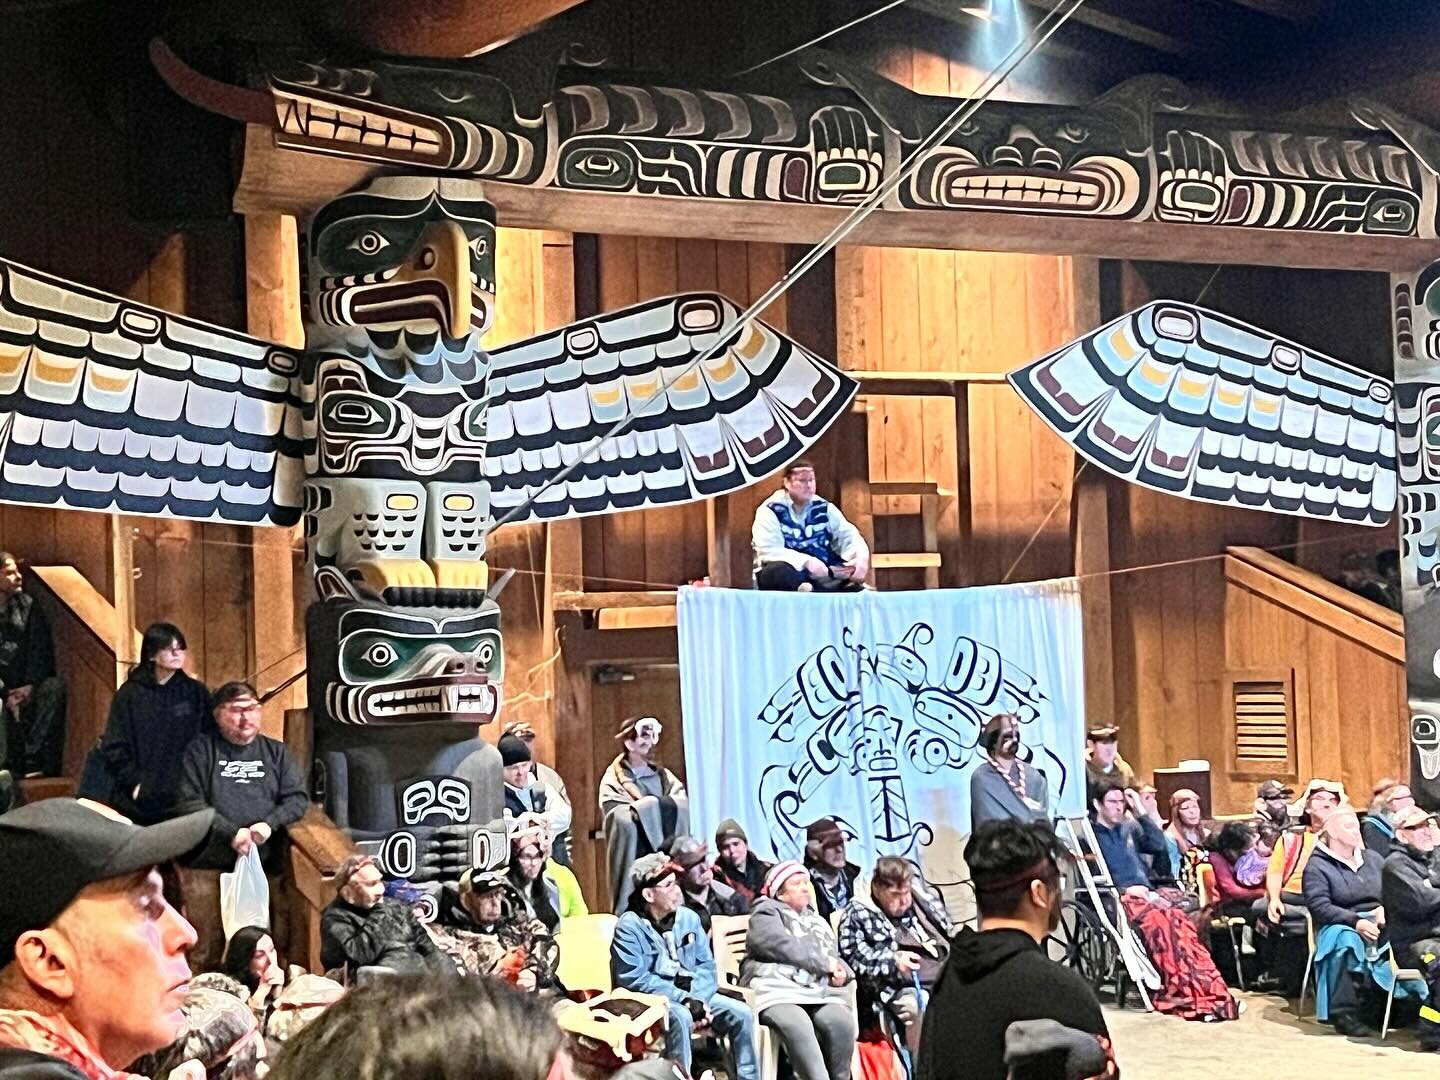 Two days of Nawalakw in our great house uplifting family lines and kin of Chief Wax̱a̱widi William Wasden Jr. 

I was in awe and amazement for how much love and dedication was poured into the many years, weeks days and final moments of ceremonial pre